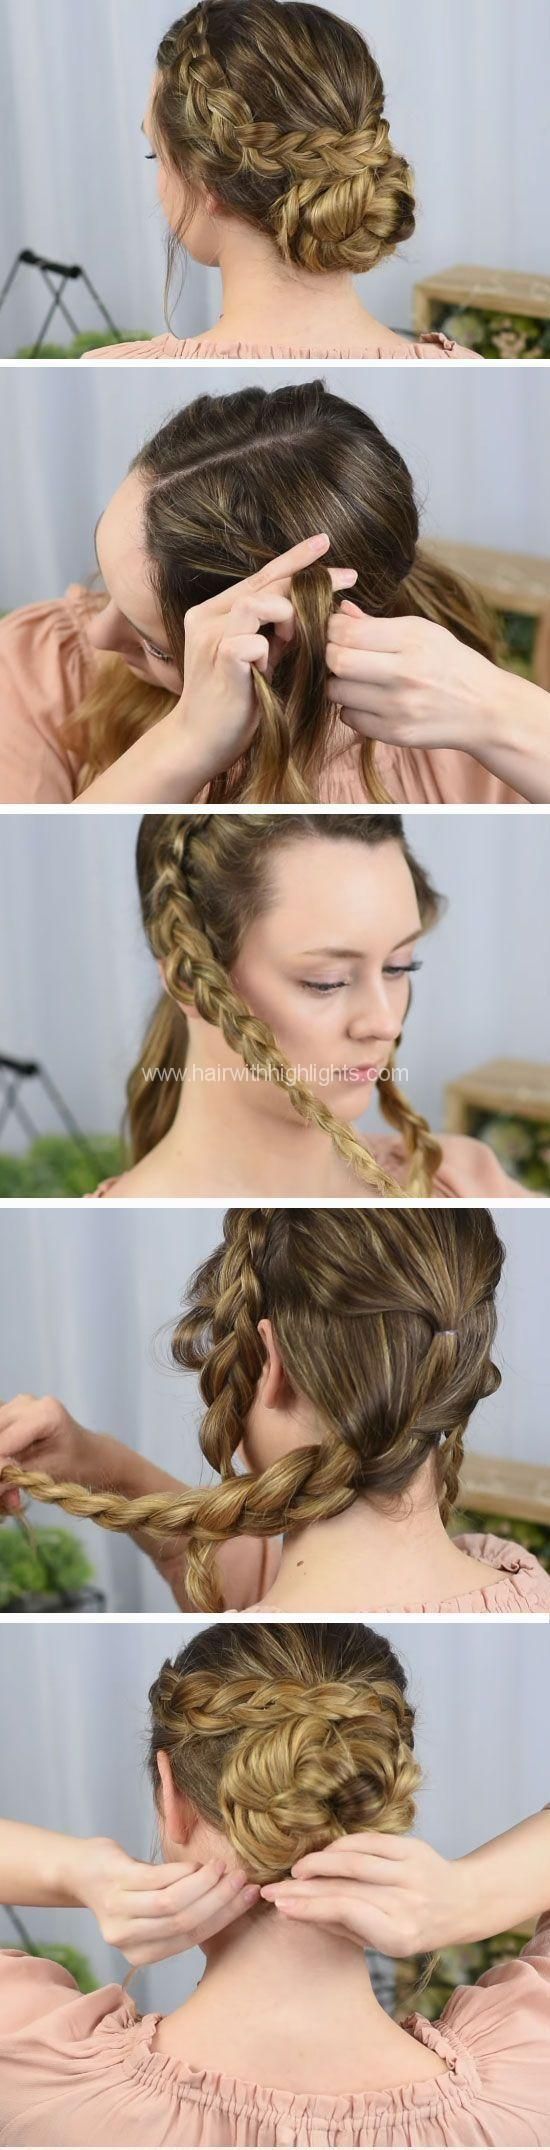 Dutch braided up-do | Fast DIY Prom Hairstyles for Medium H  #styles #braided #medical #netherlands – Site Today